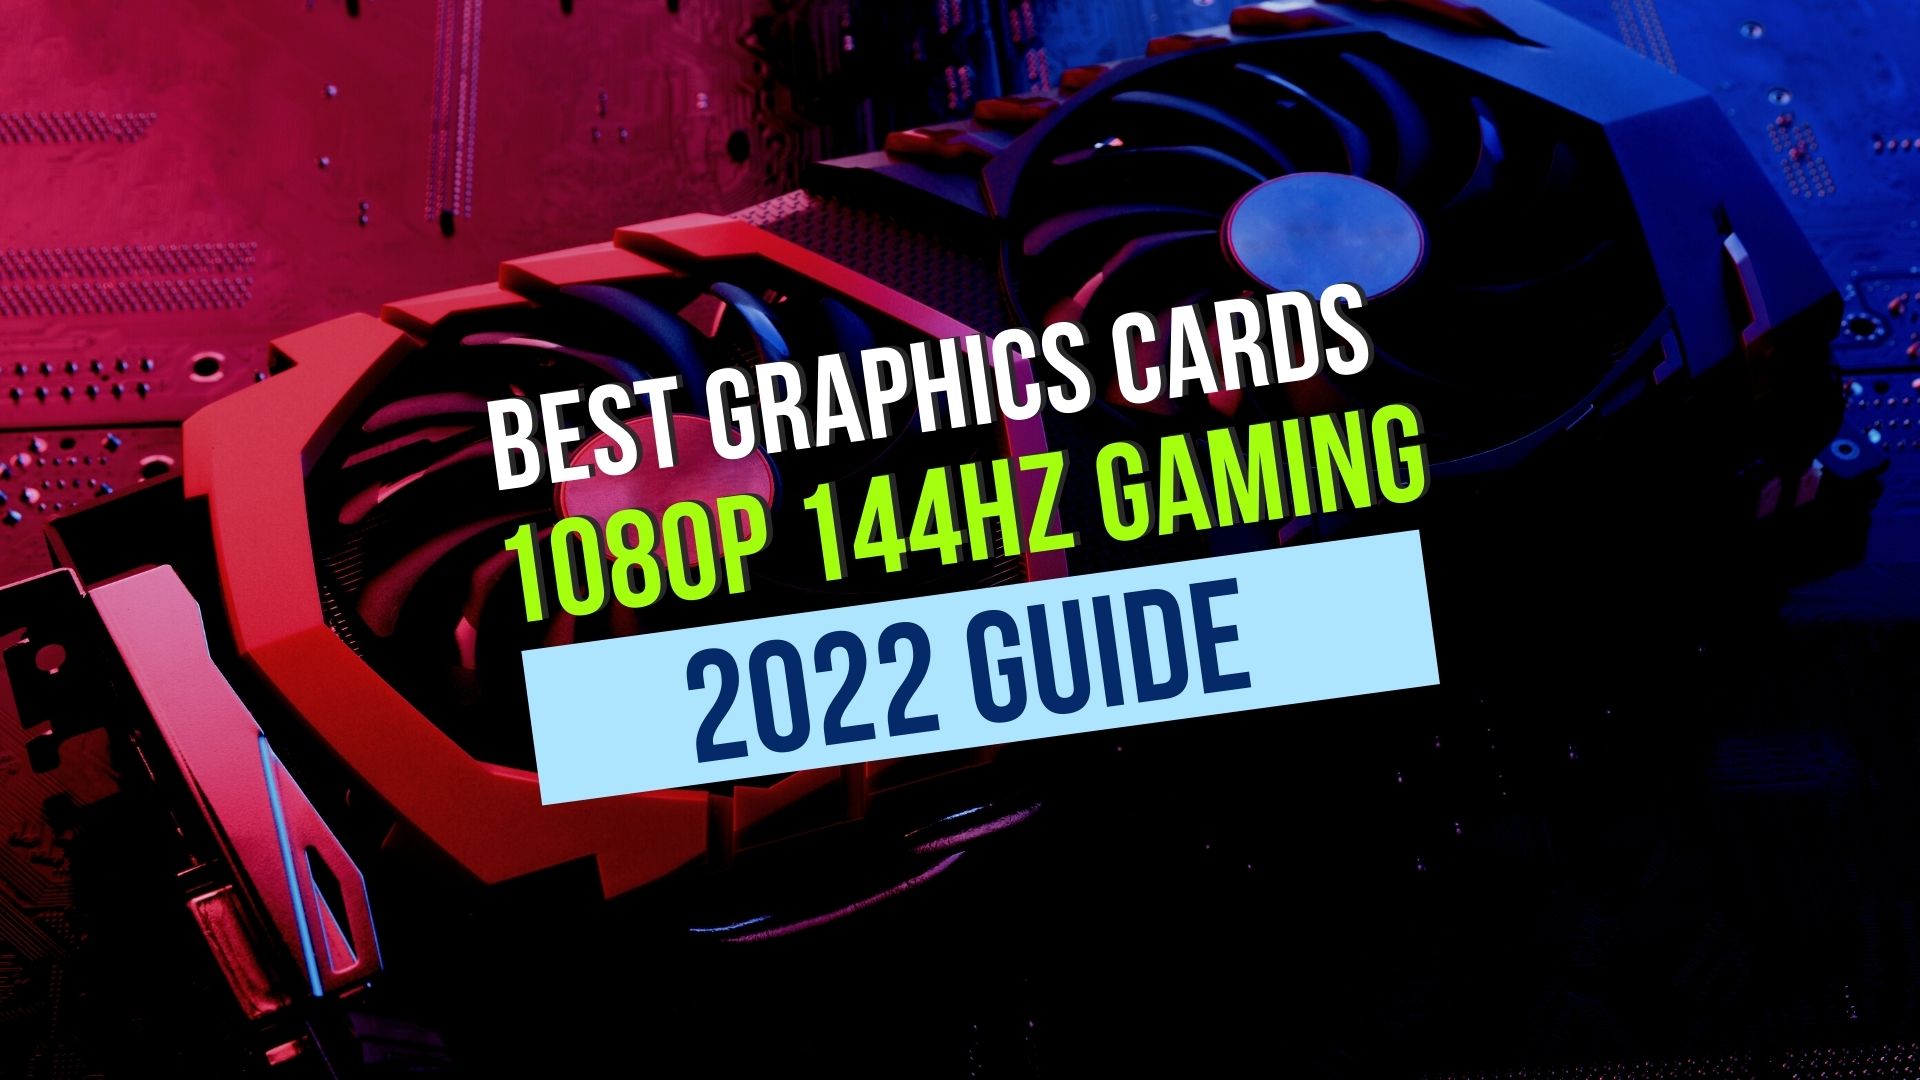 Best Graphics Cards for 1080p 144hz Gaming